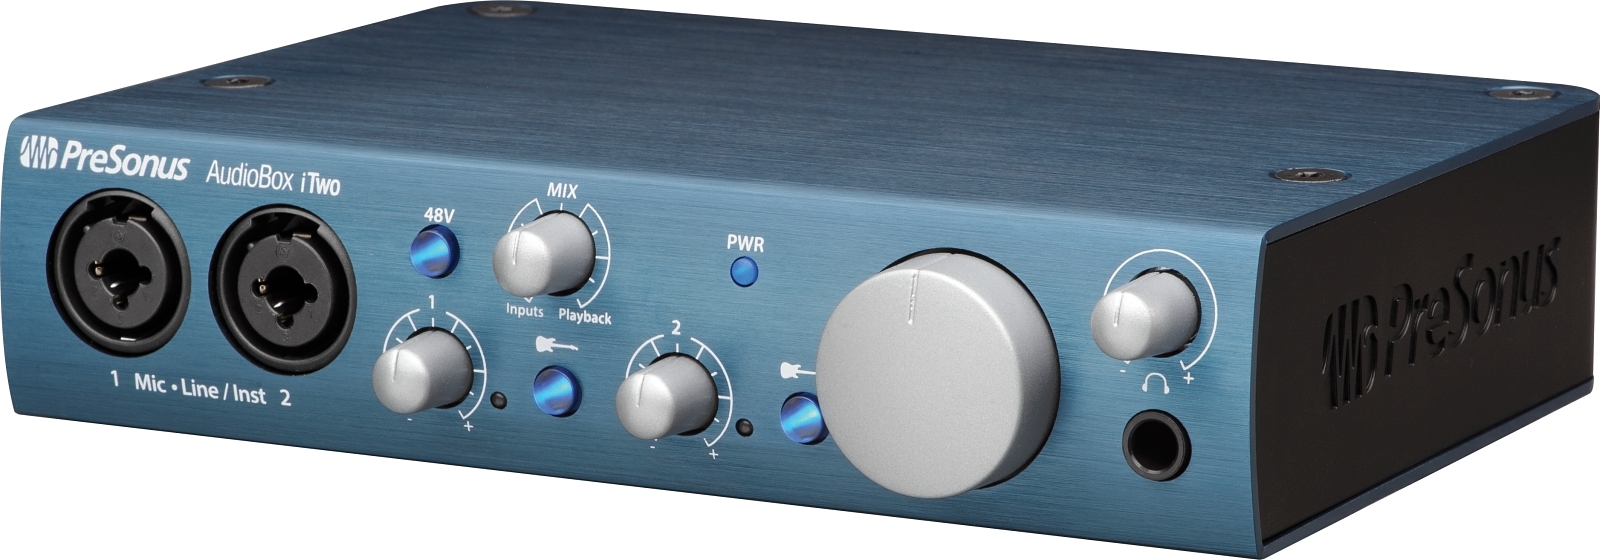 image of the AudioBox iTwo interface by PreSonus